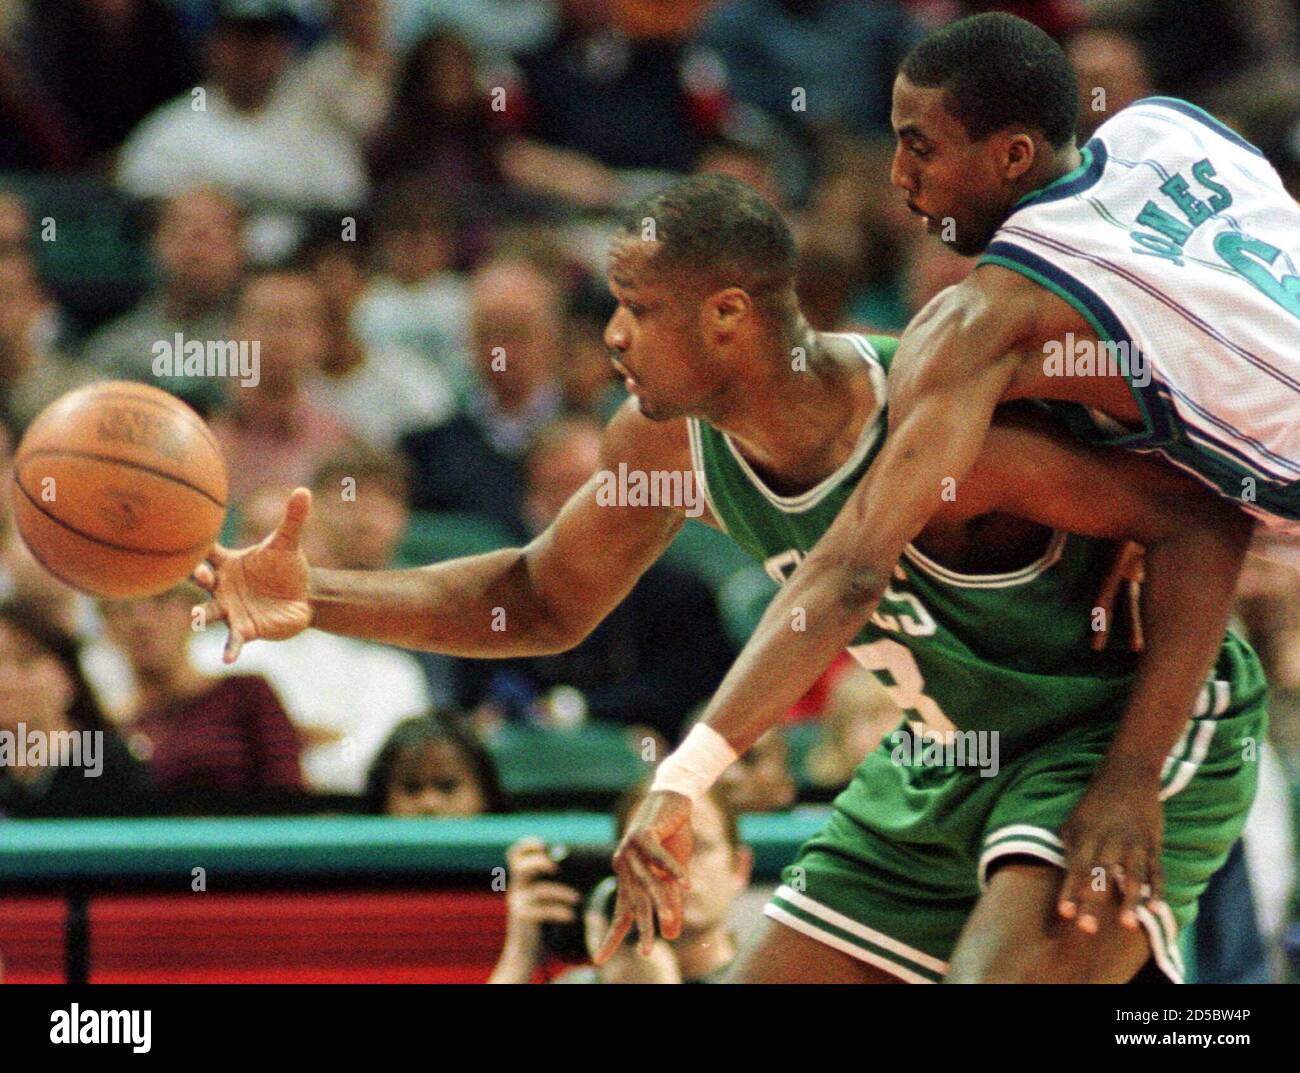 Charlotte Hornets' guard Eddie Jones (R) knocks the ball loose from Boston  Celtics' forward Antoine Walker (L), March 30 during first half NBA action  at the Charlotte Coliseum. RDP/HB/CC Stock Photo -